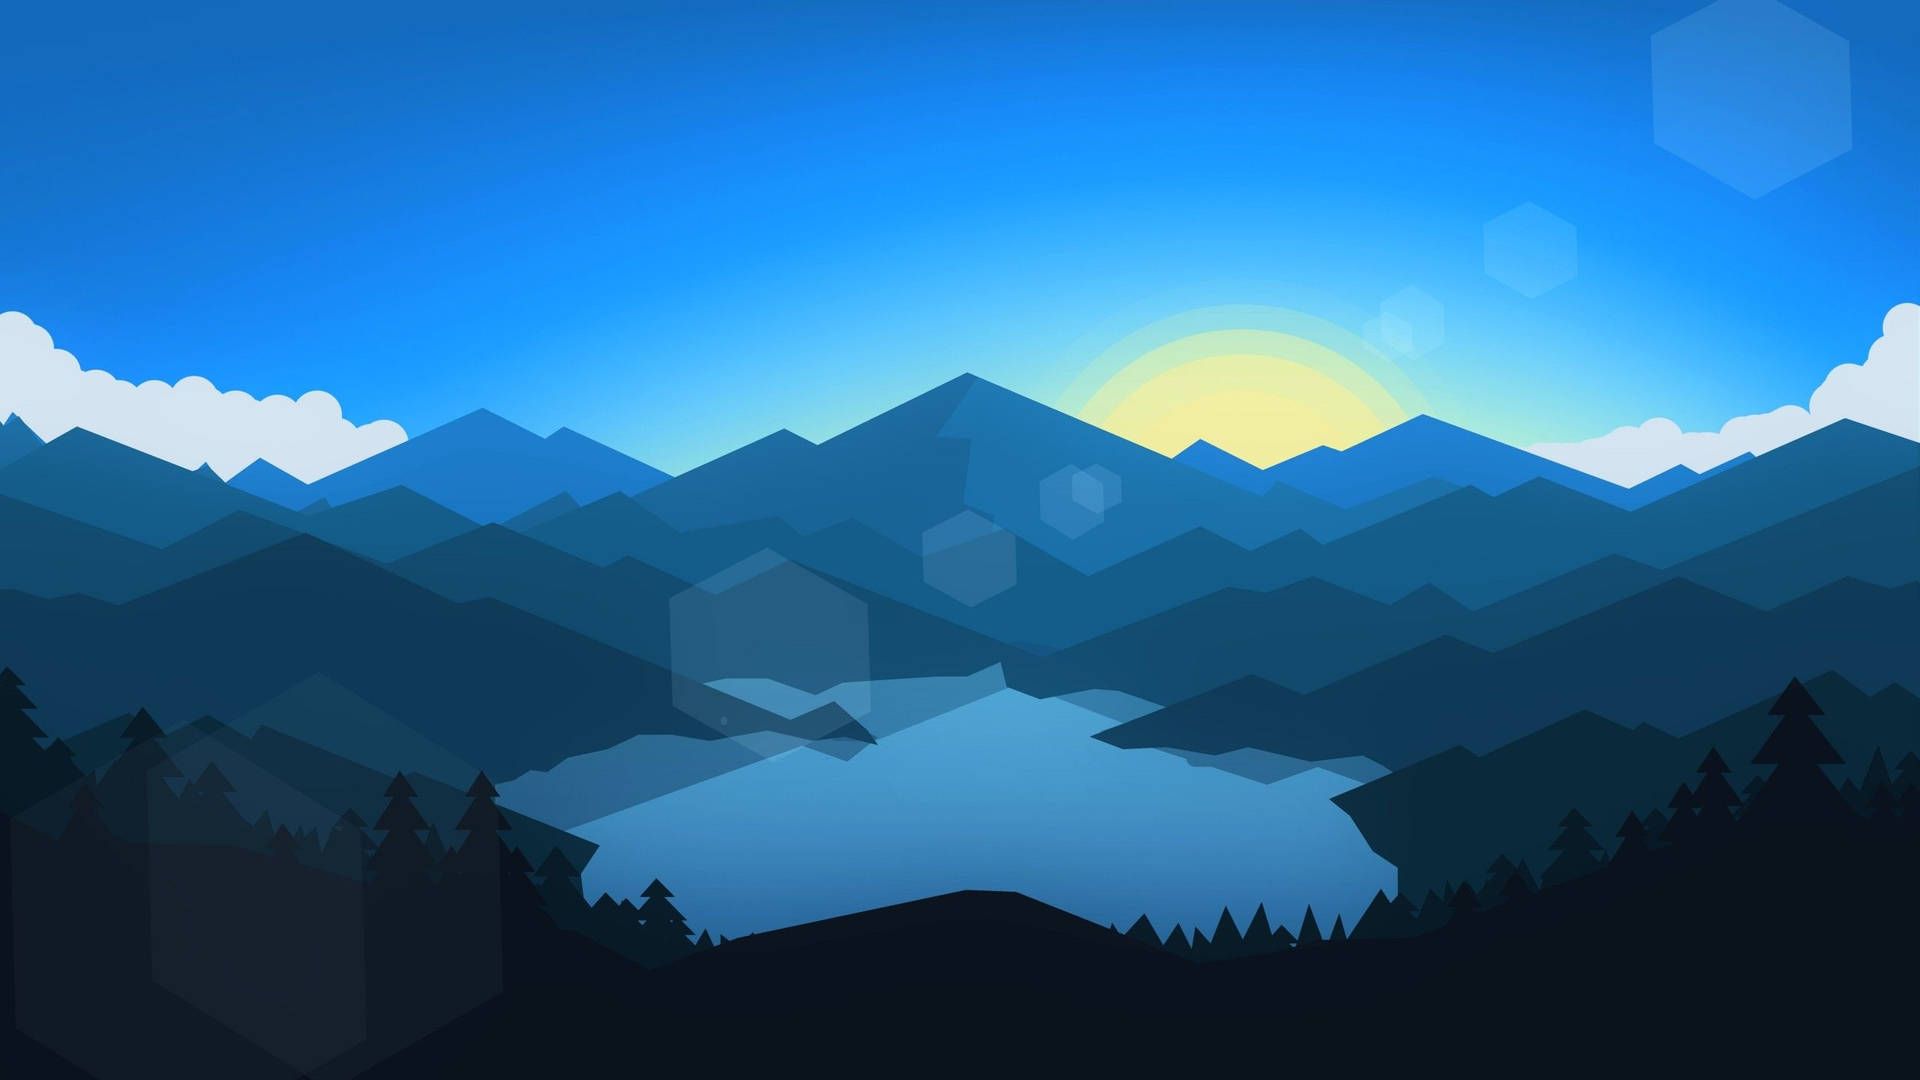 A beautiful wallpaper of a mountain lake with the sun rising - Low poly